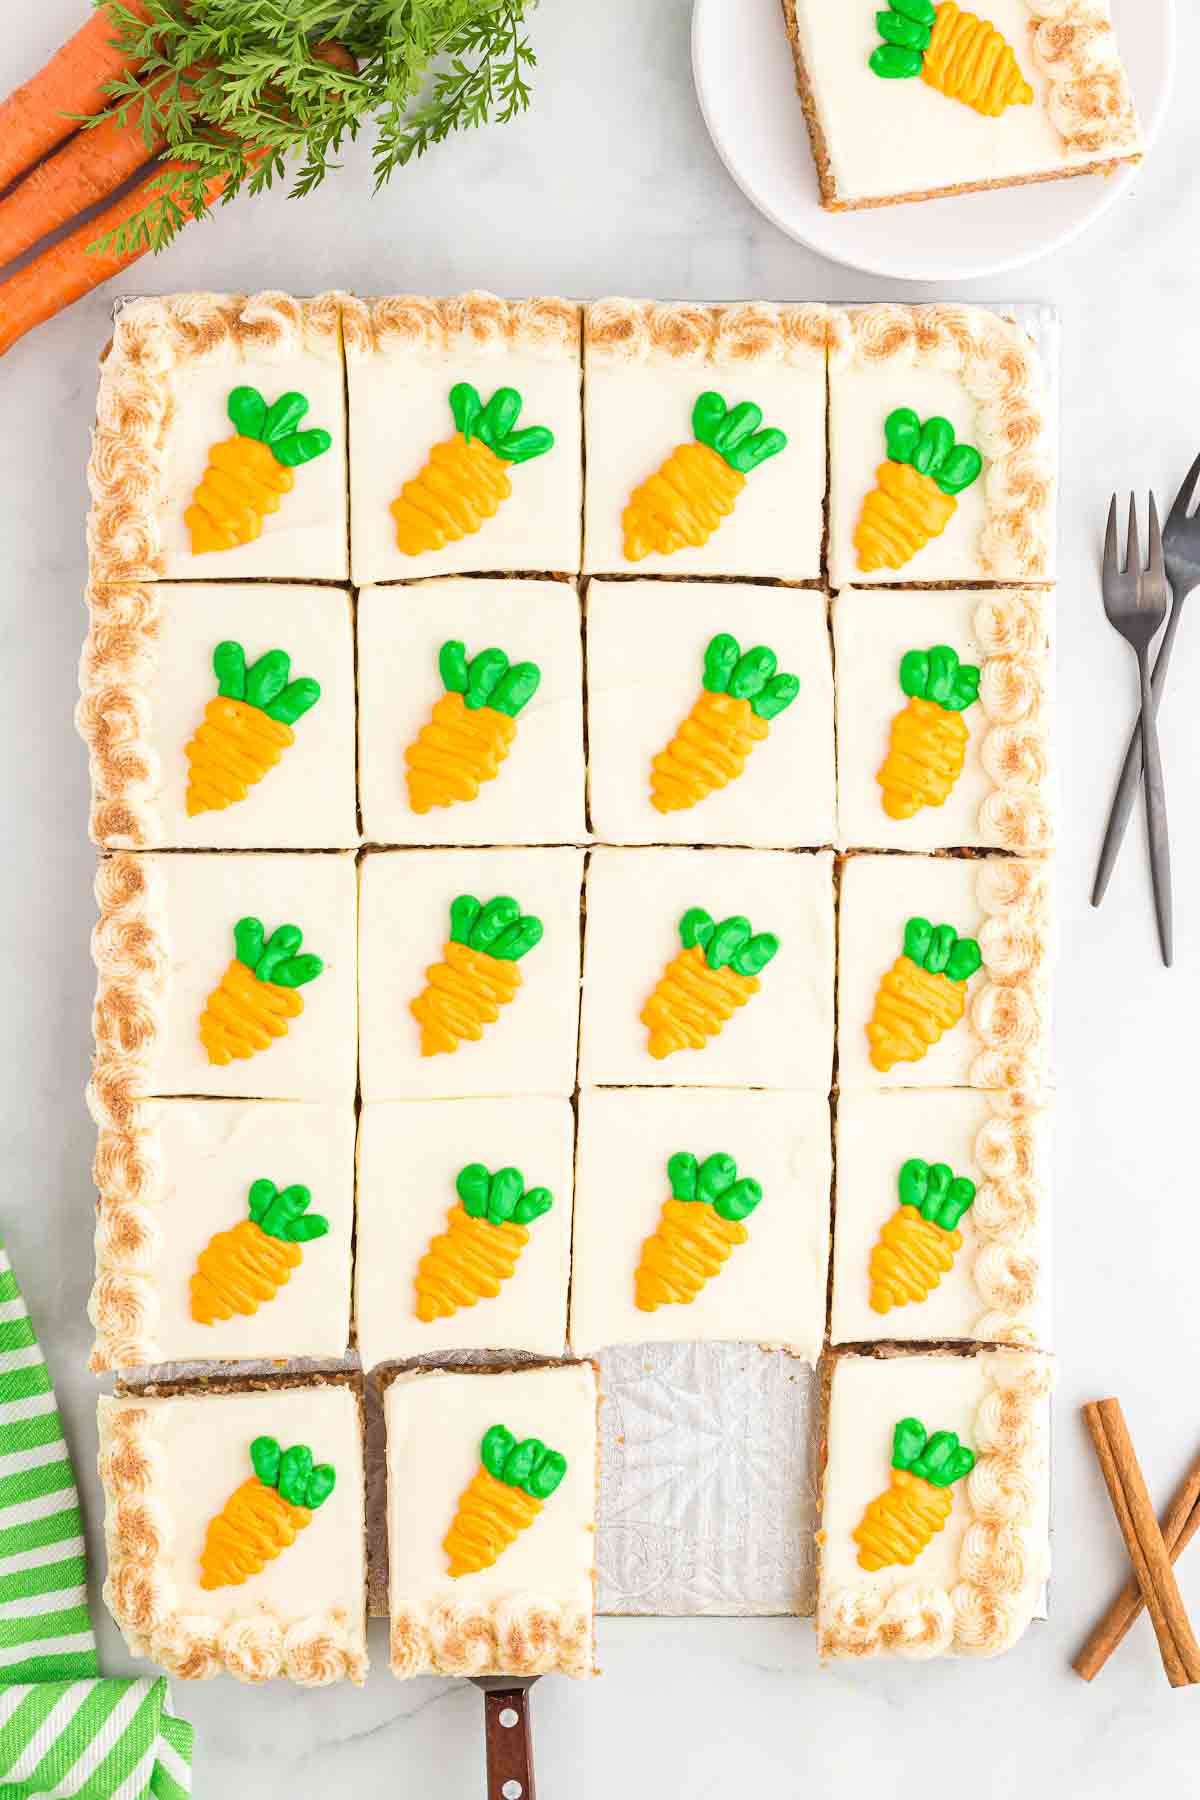 carrot cake made in a sheet pan with cream cheese frosting and decorative carrots